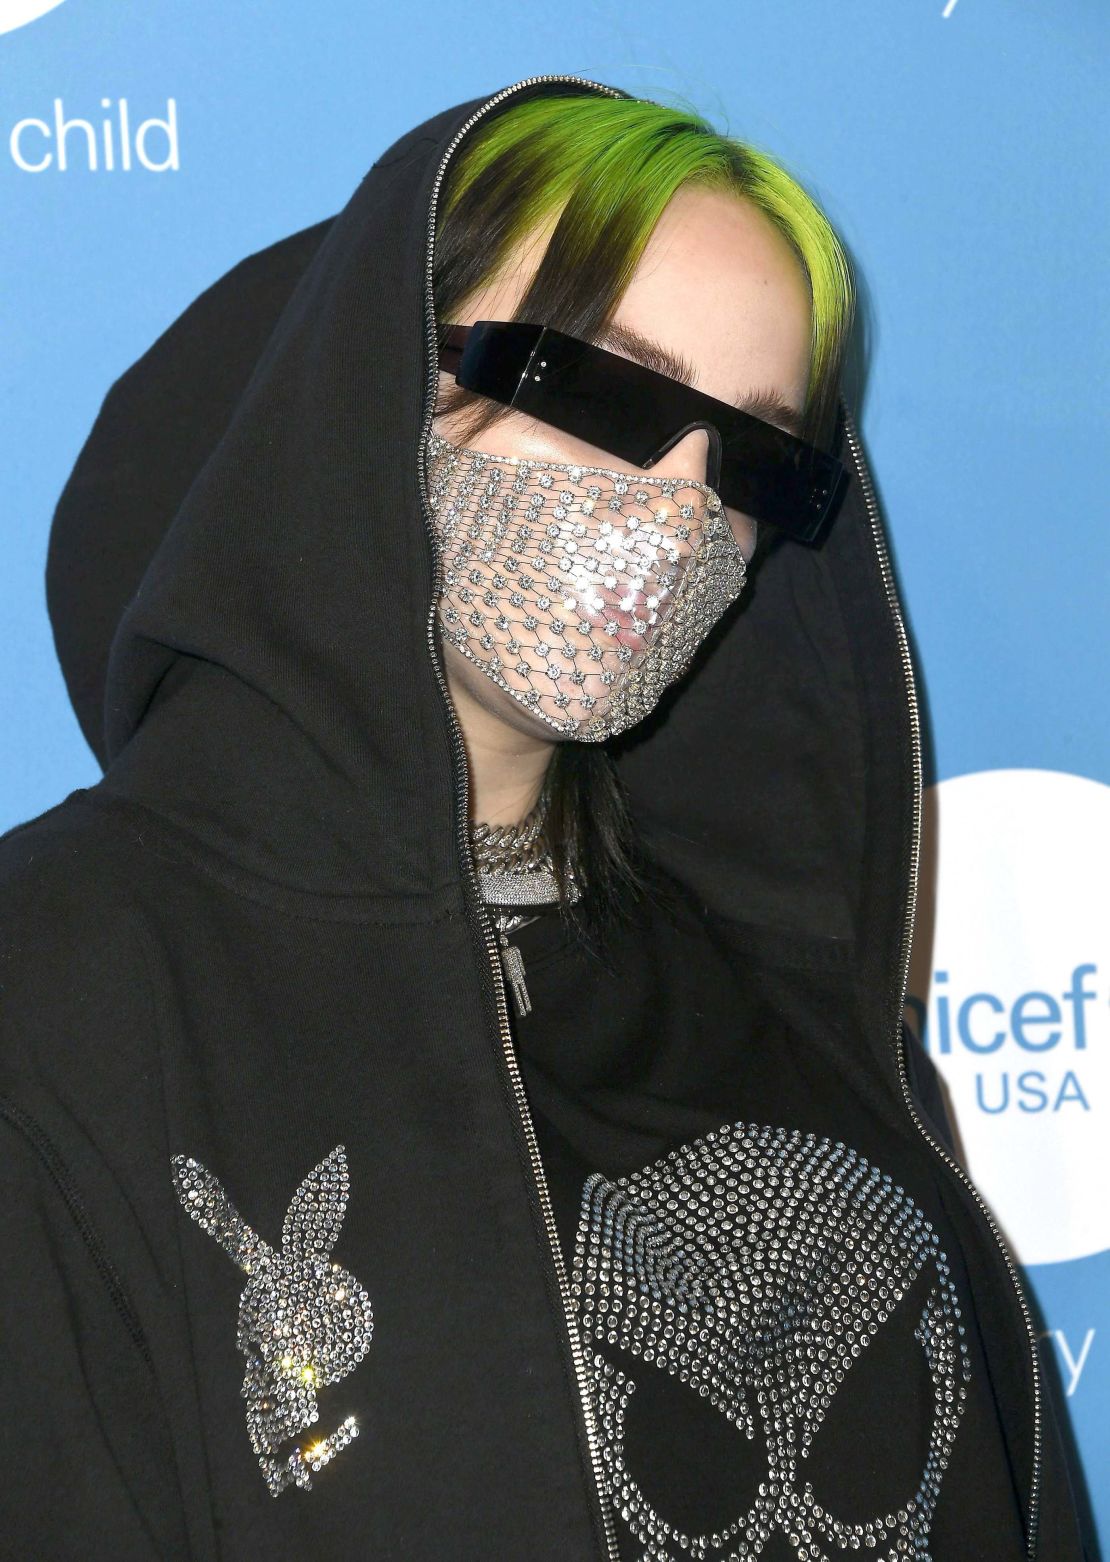 Billie Eilish wears a mask to the UNICEF Masquerade Ball in West Hollywood on October 26, 2019.